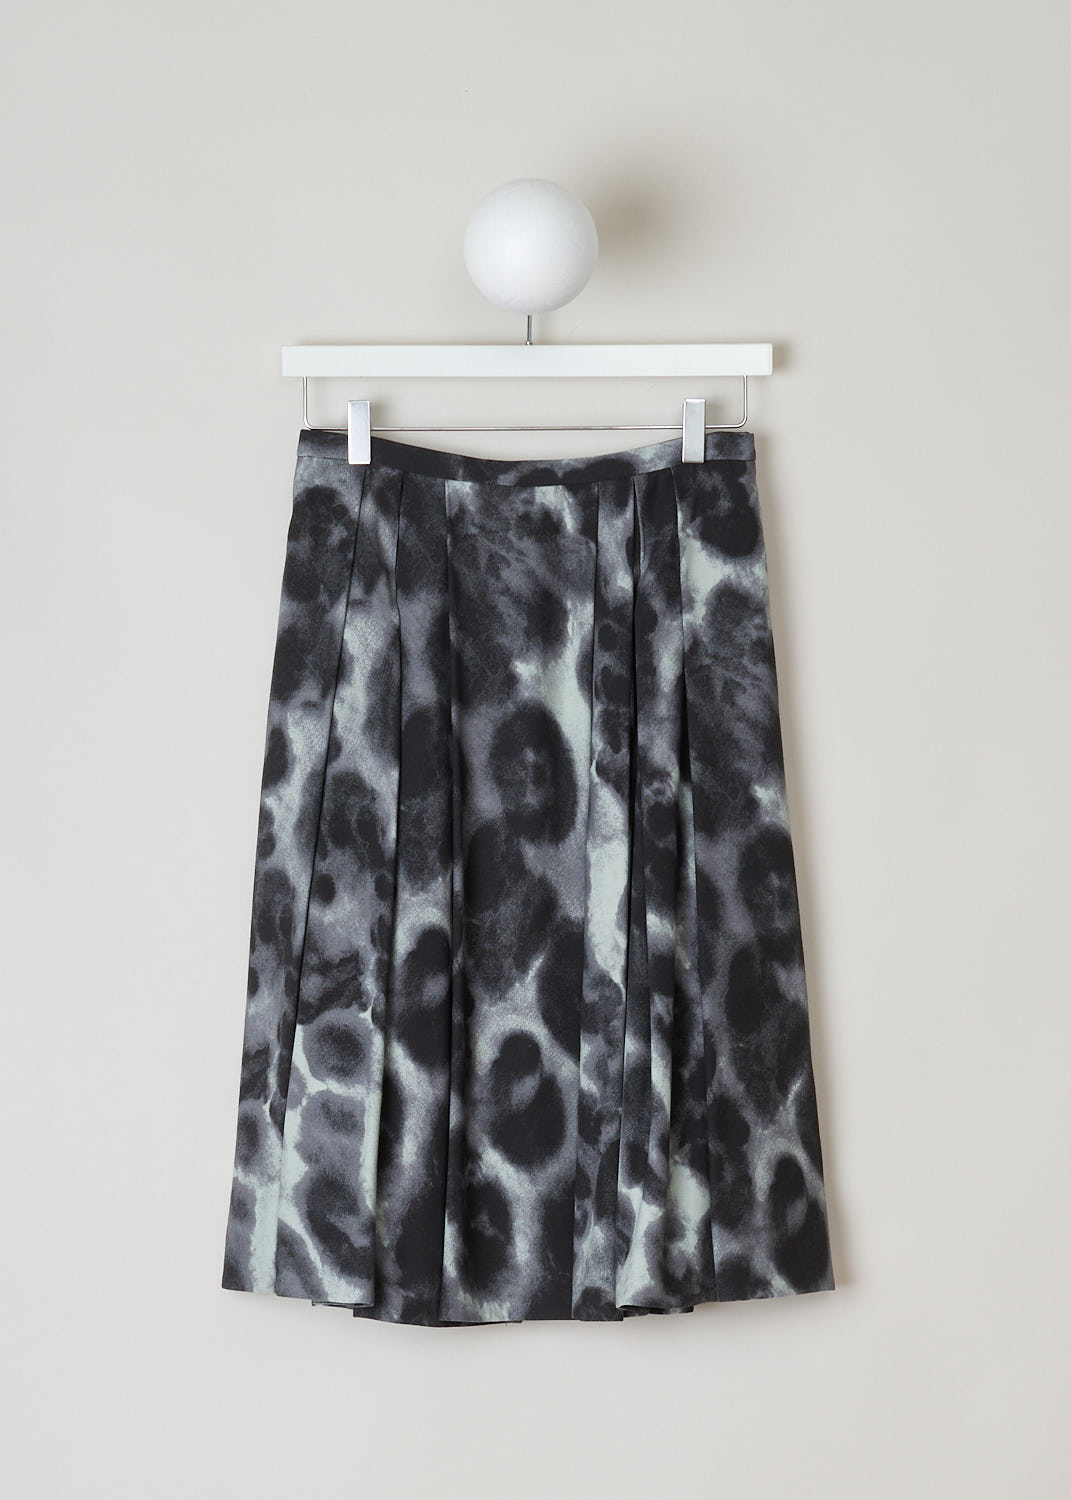 ASPESI, FADED ANIMAL PRINT SKIRT, 2217_V129_02189, Black, Print, Front, This pleated midi skirt has a faded animal print. This skirt is fully lined and has a button and concealed side zip closure. 
